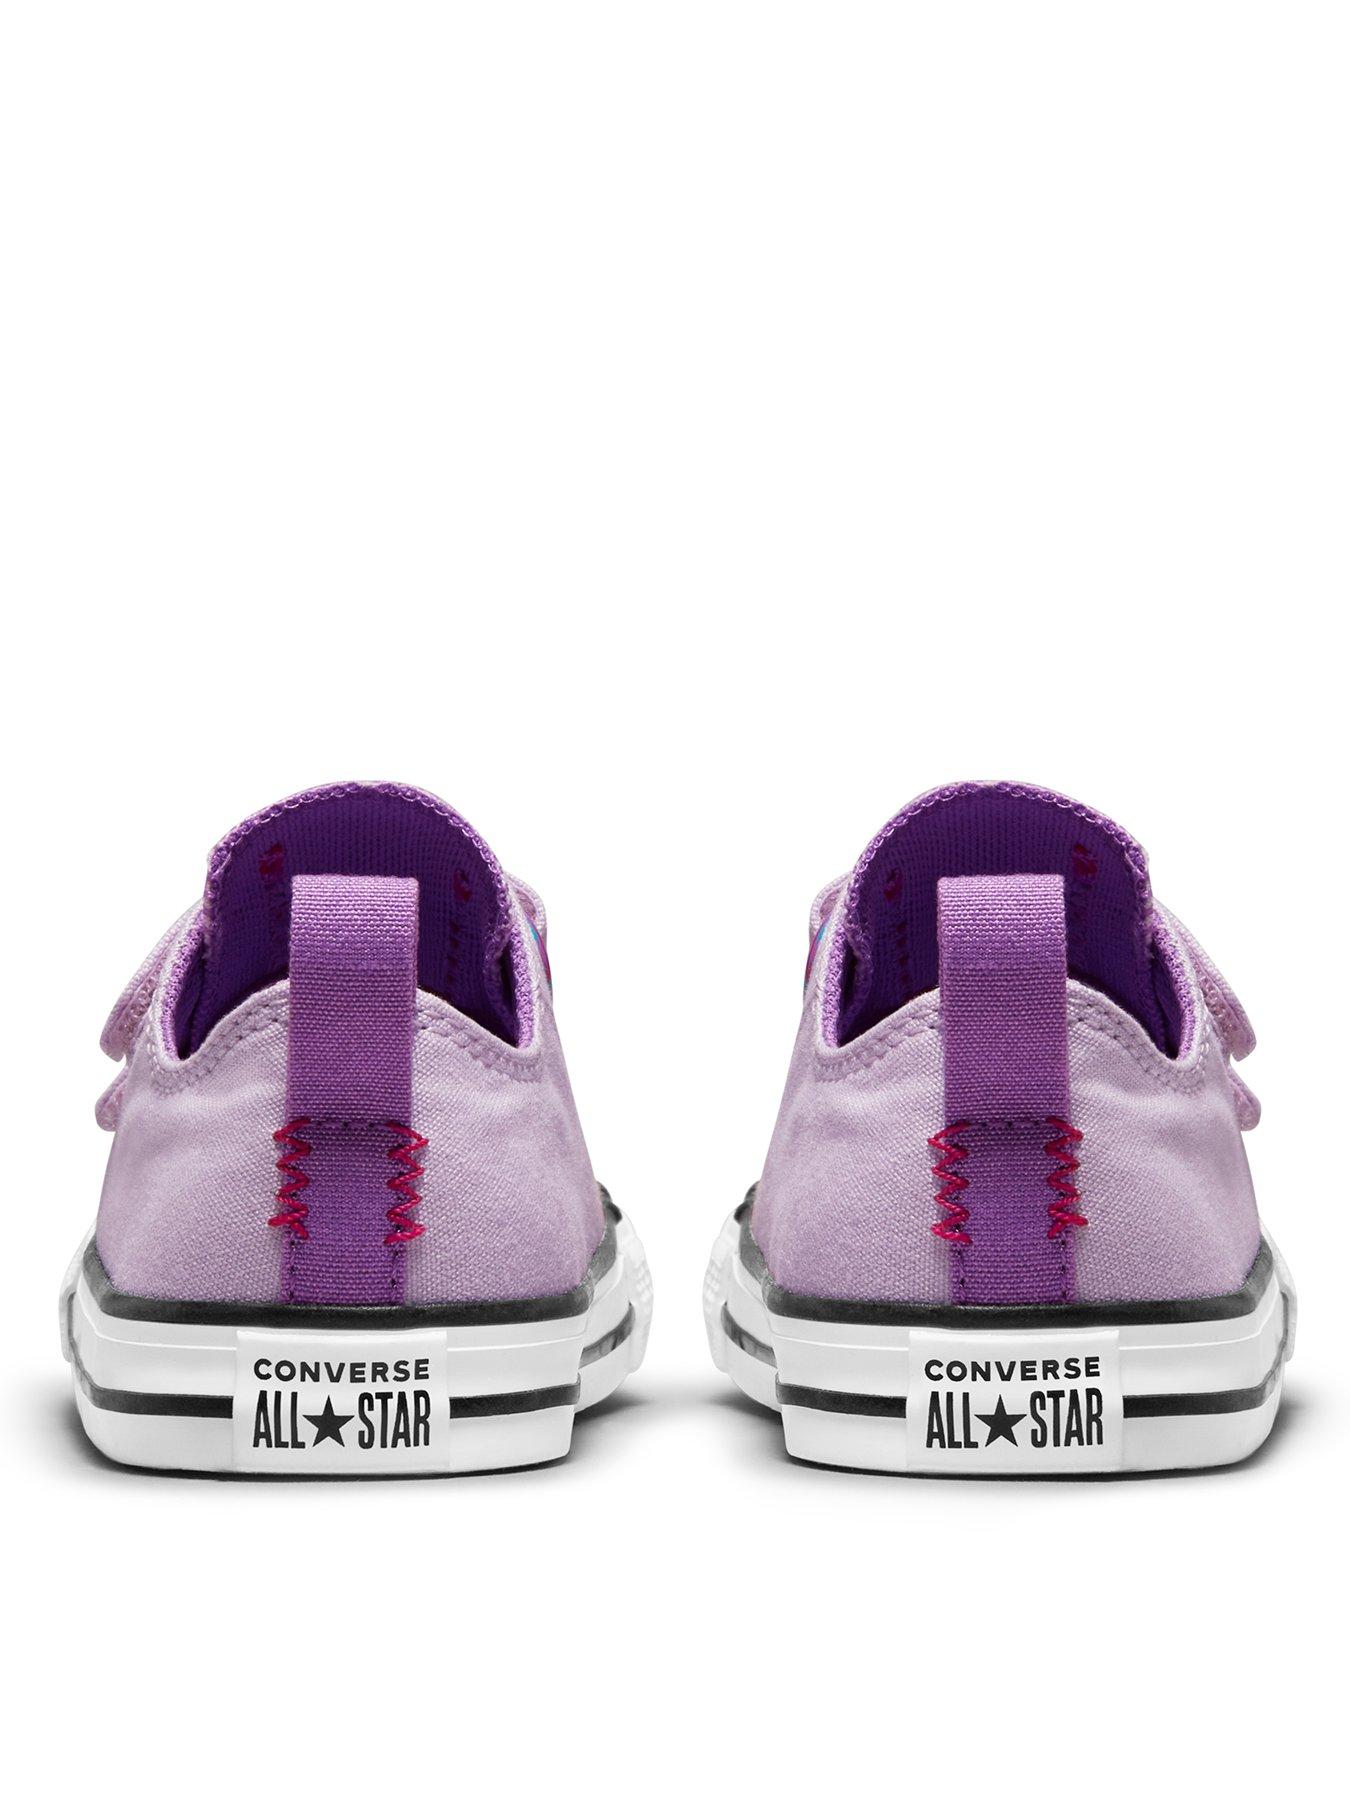 Trainers Chuck Taylor All Star Ox 2V Infant Girls Color Pop Trainers -Purple